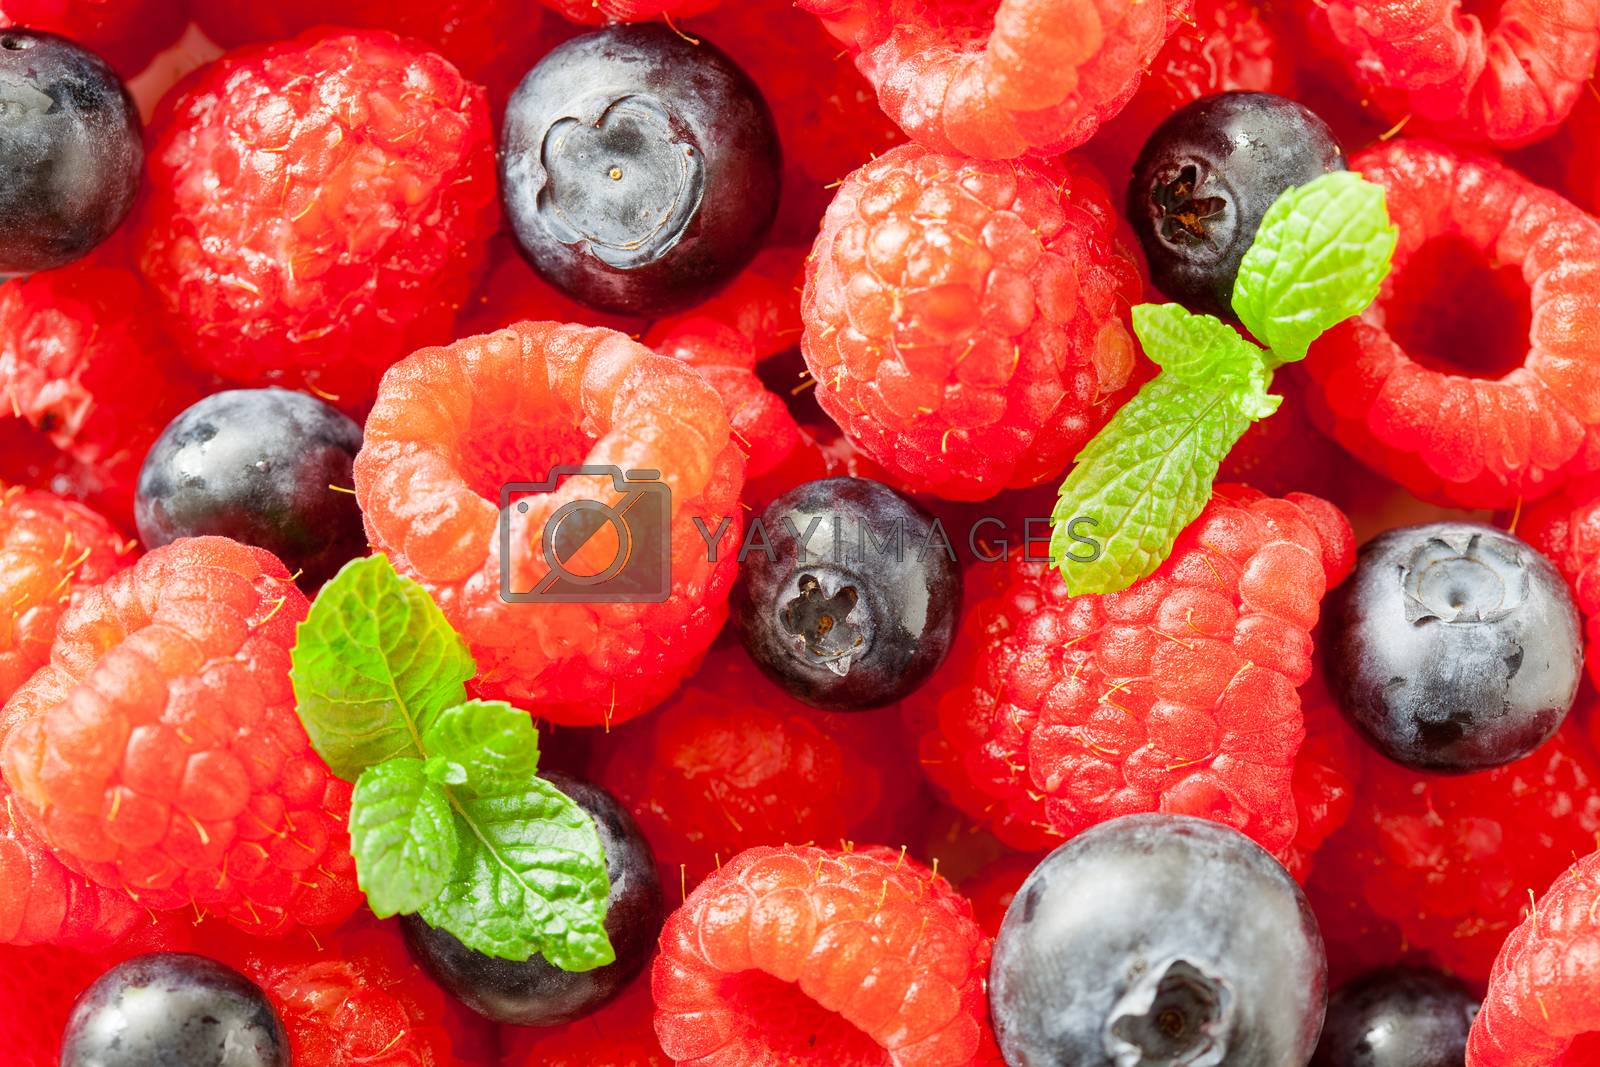 Royalty free image of Raspberries And Blueberries by mpessaris